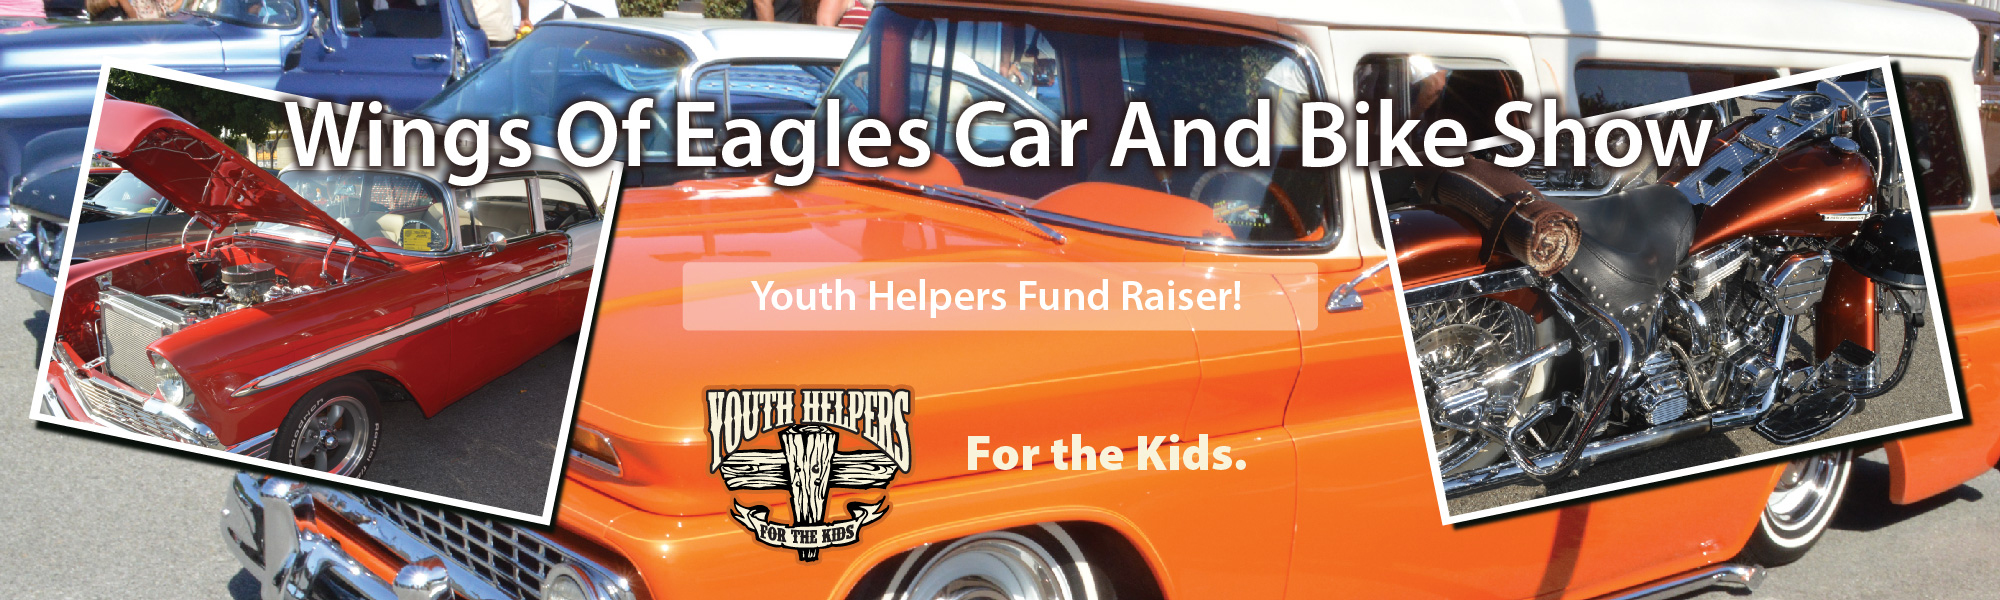 Wings of Eagles Car and Bike Show: Youth Helpers Fund Raiser